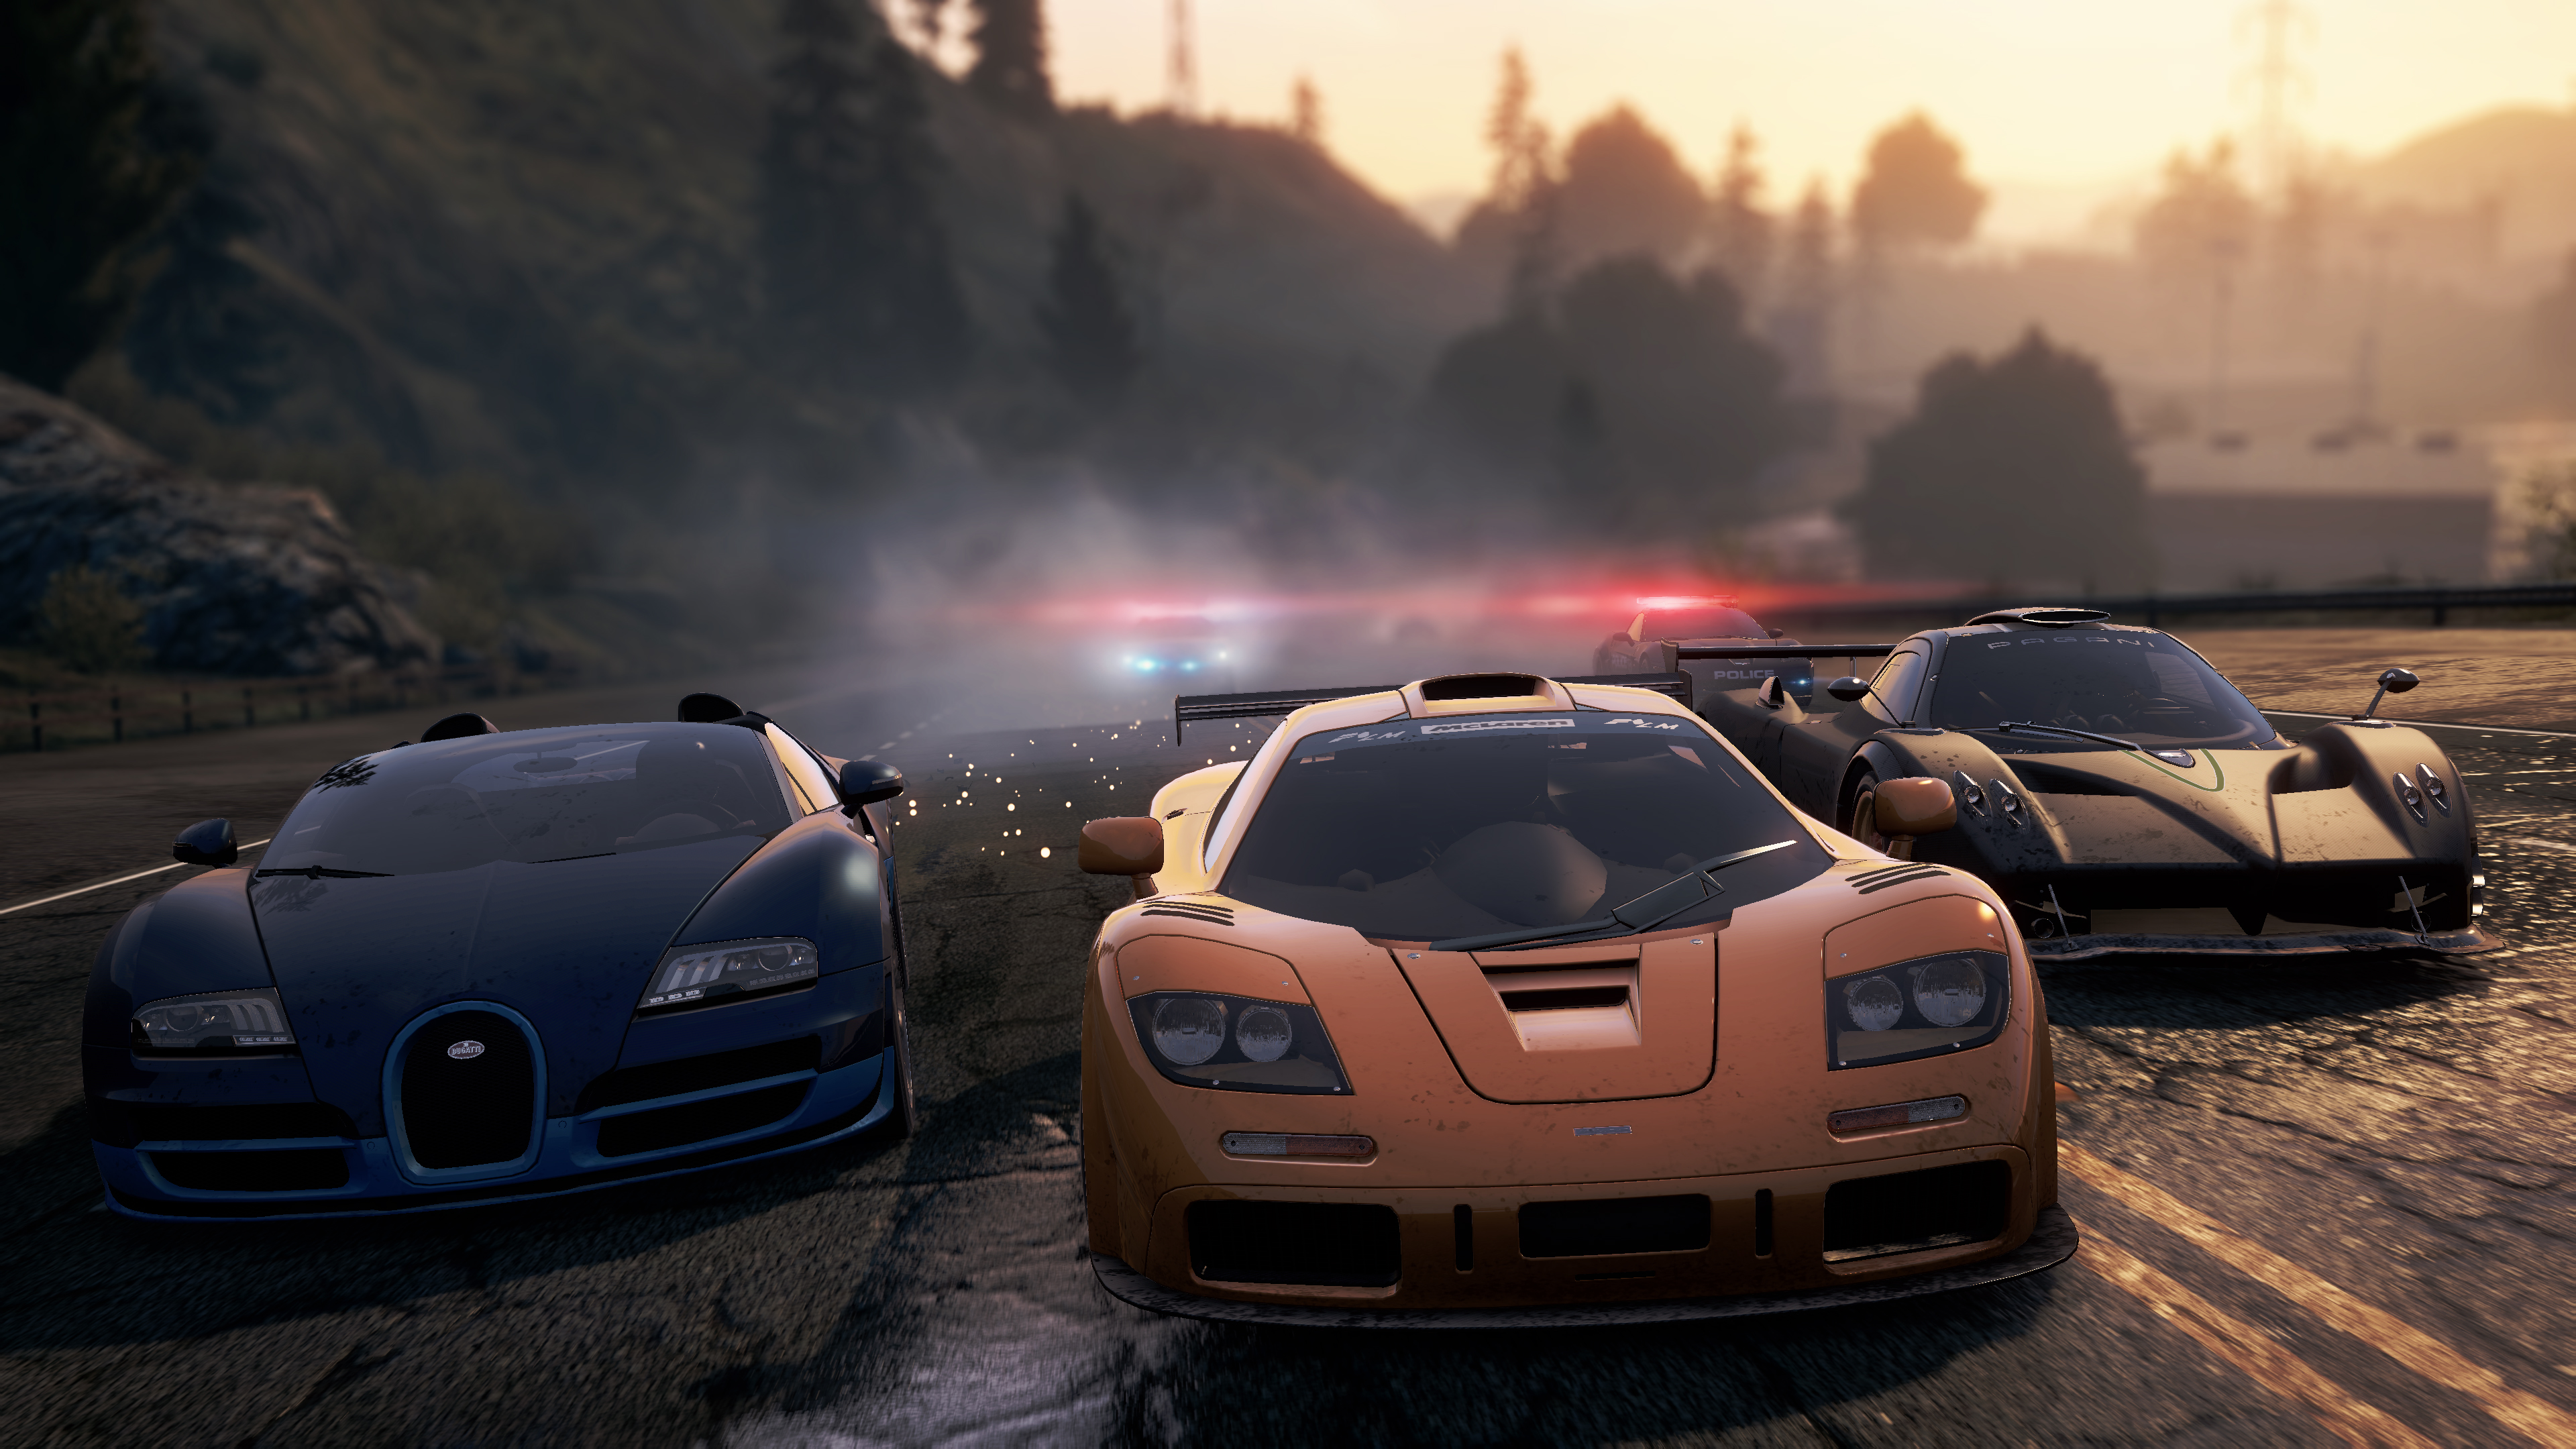 Nfs игра гонки. Need for Speed 2022. NFS most wanted. Need for Speed most wanted 2012. Нфс 2022 геймплей.